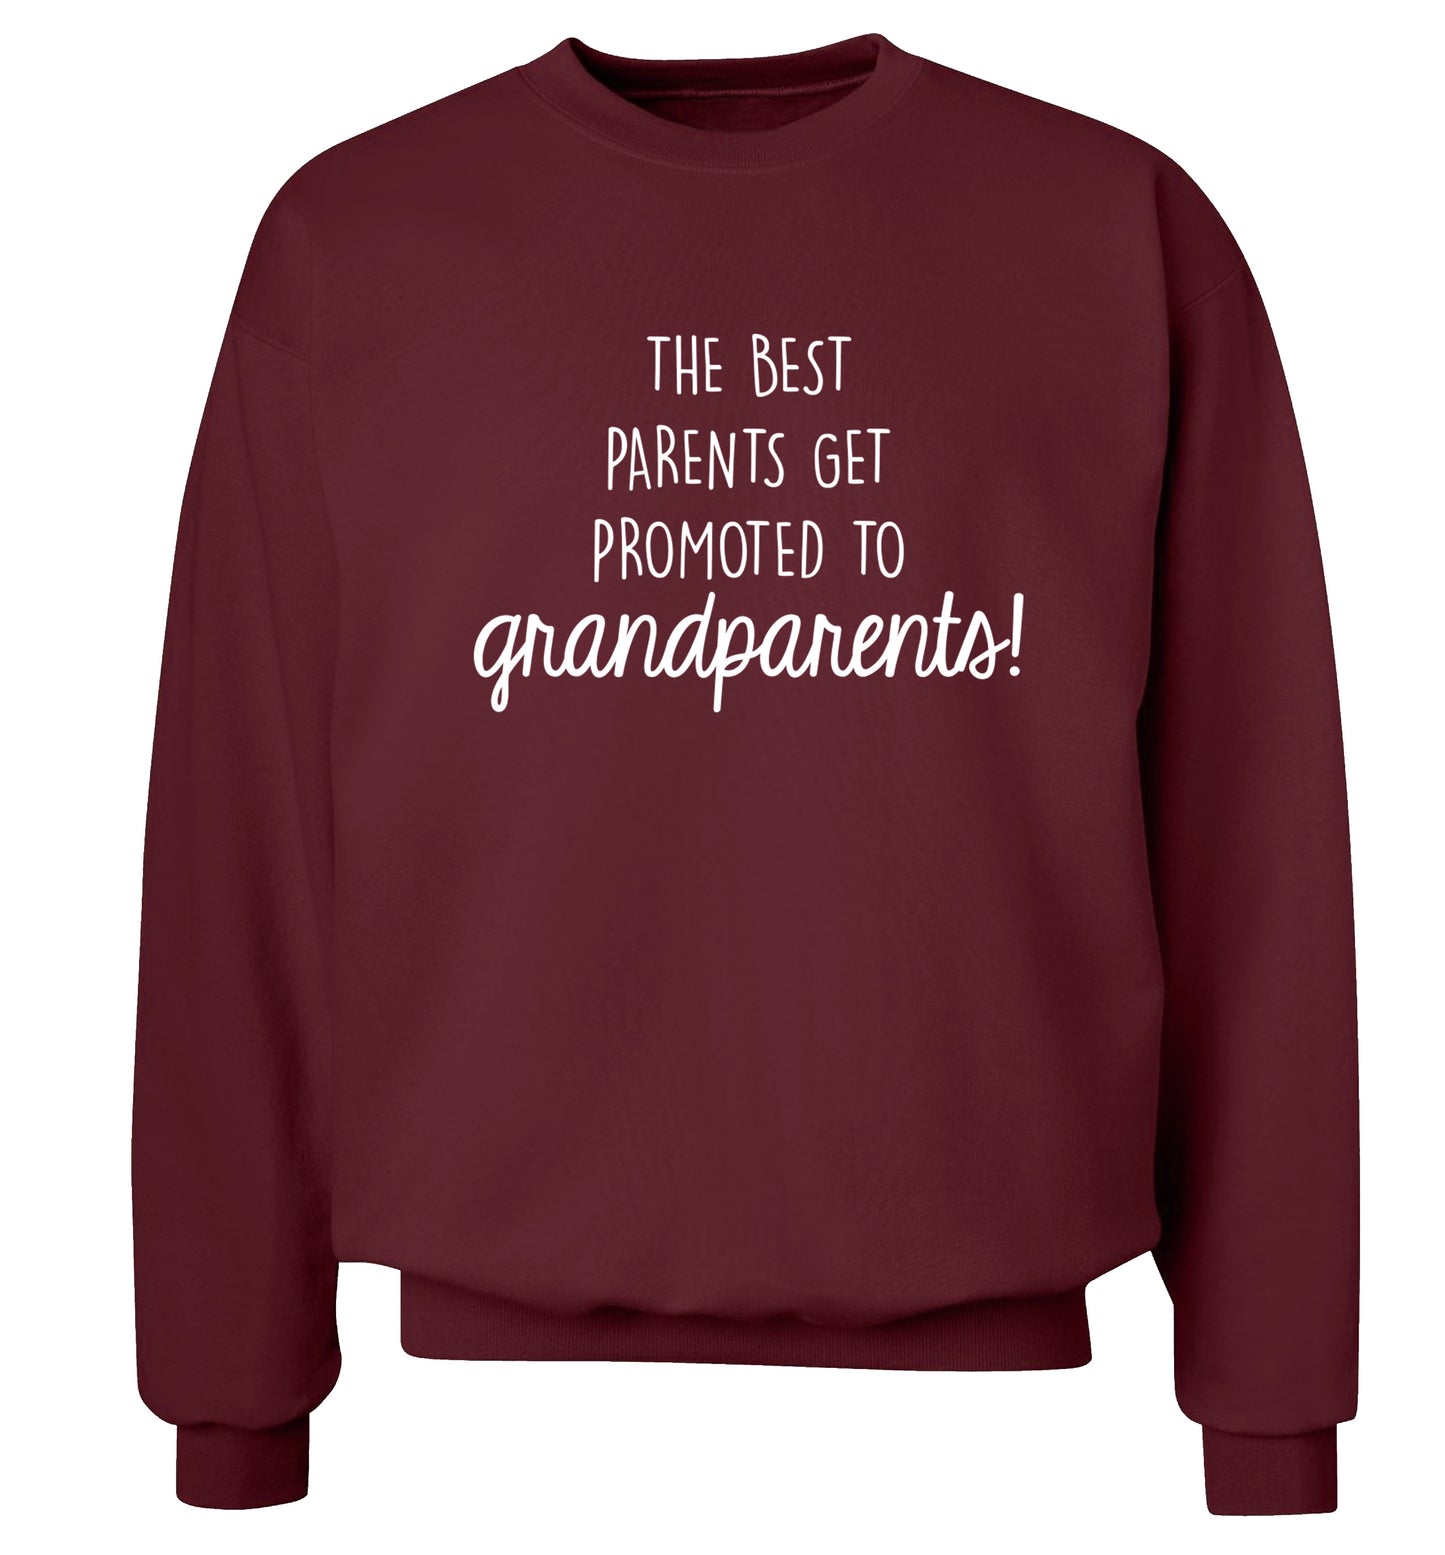 The best parents get promoted to grandparents Adult's unisex maroon Sweater 2XL